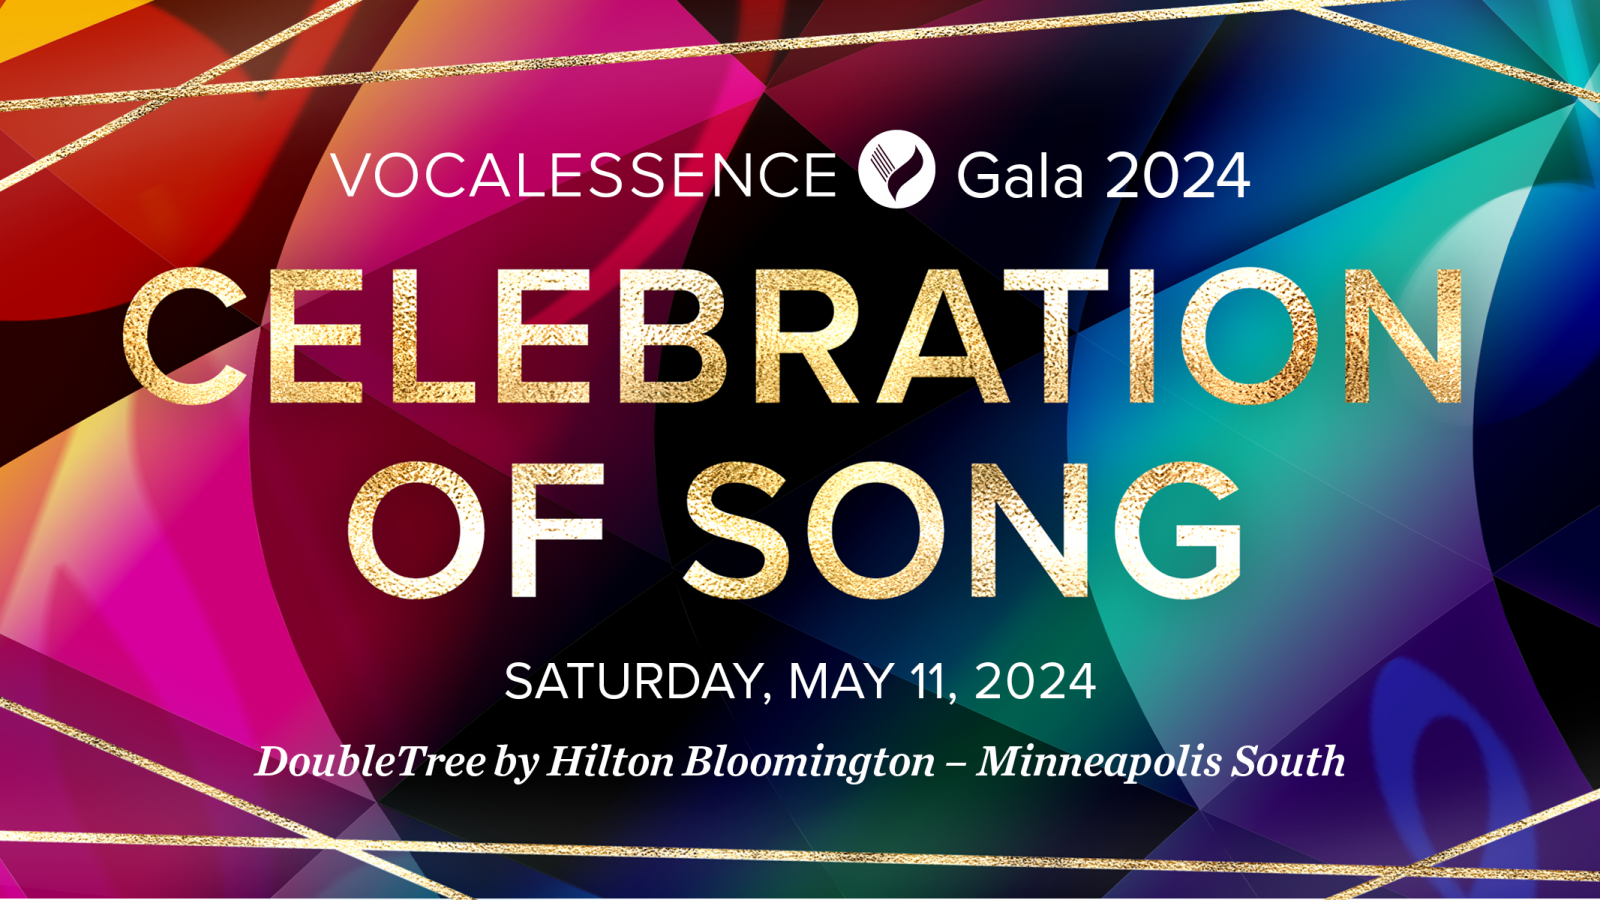 VocalEssence Gala 2024 logo with the words "Celebration of Song" and the event date and location in gold in front of a geometric colorful background. Design credit: Lora Joshi